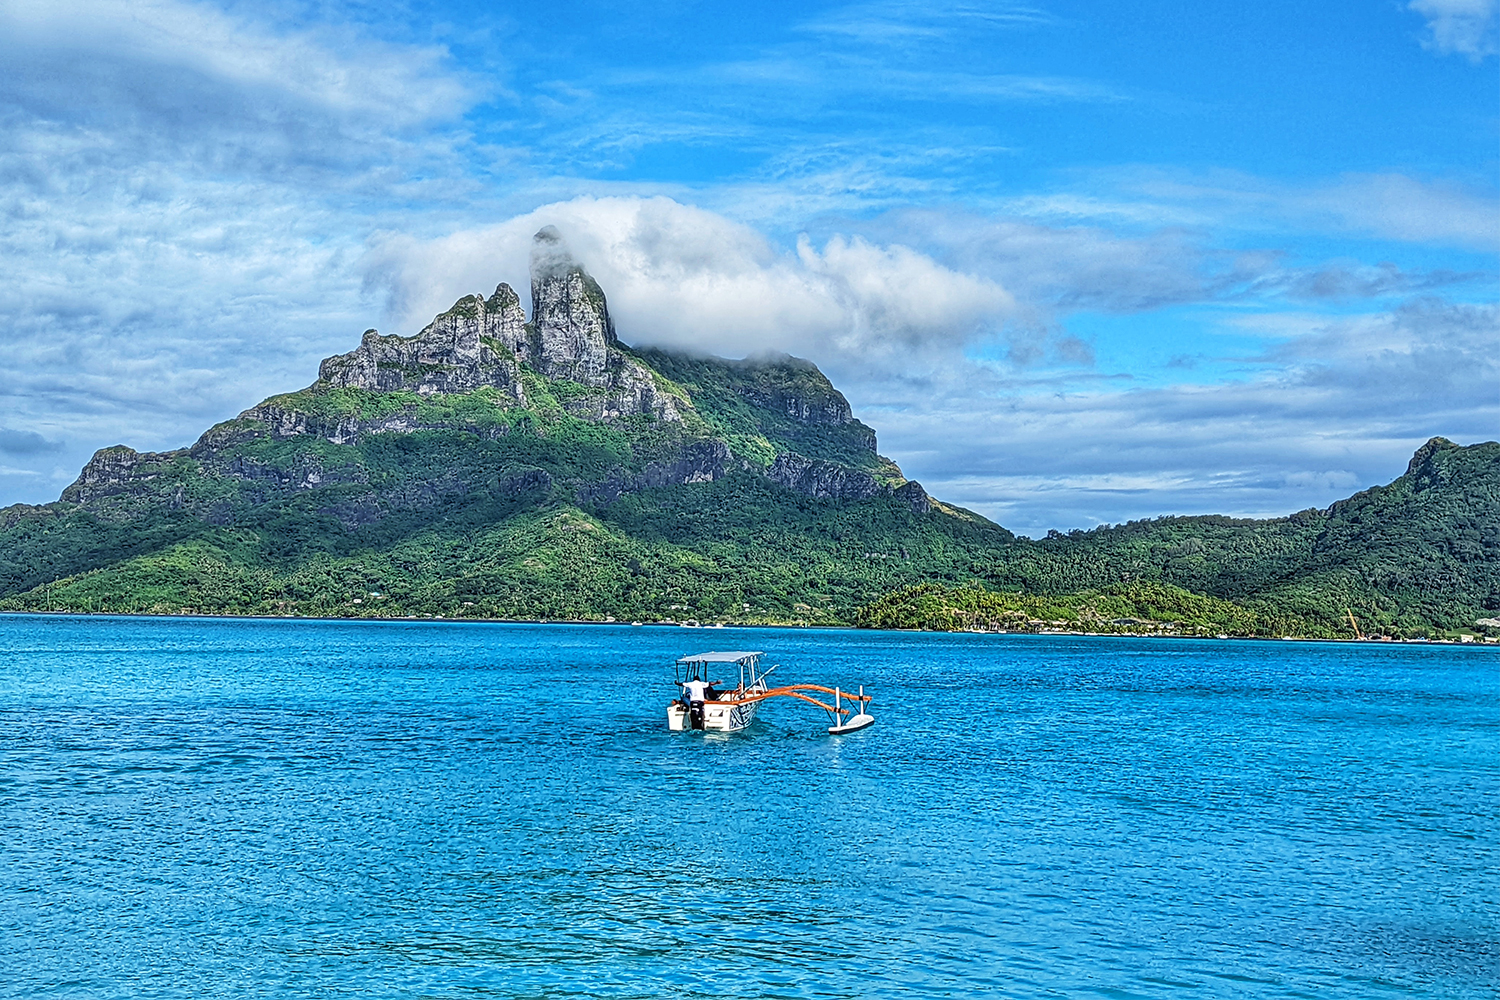 An outrigger boat in the ocean heading towards the island of Bora Bora in the Tahitian Islands of French Polynesia